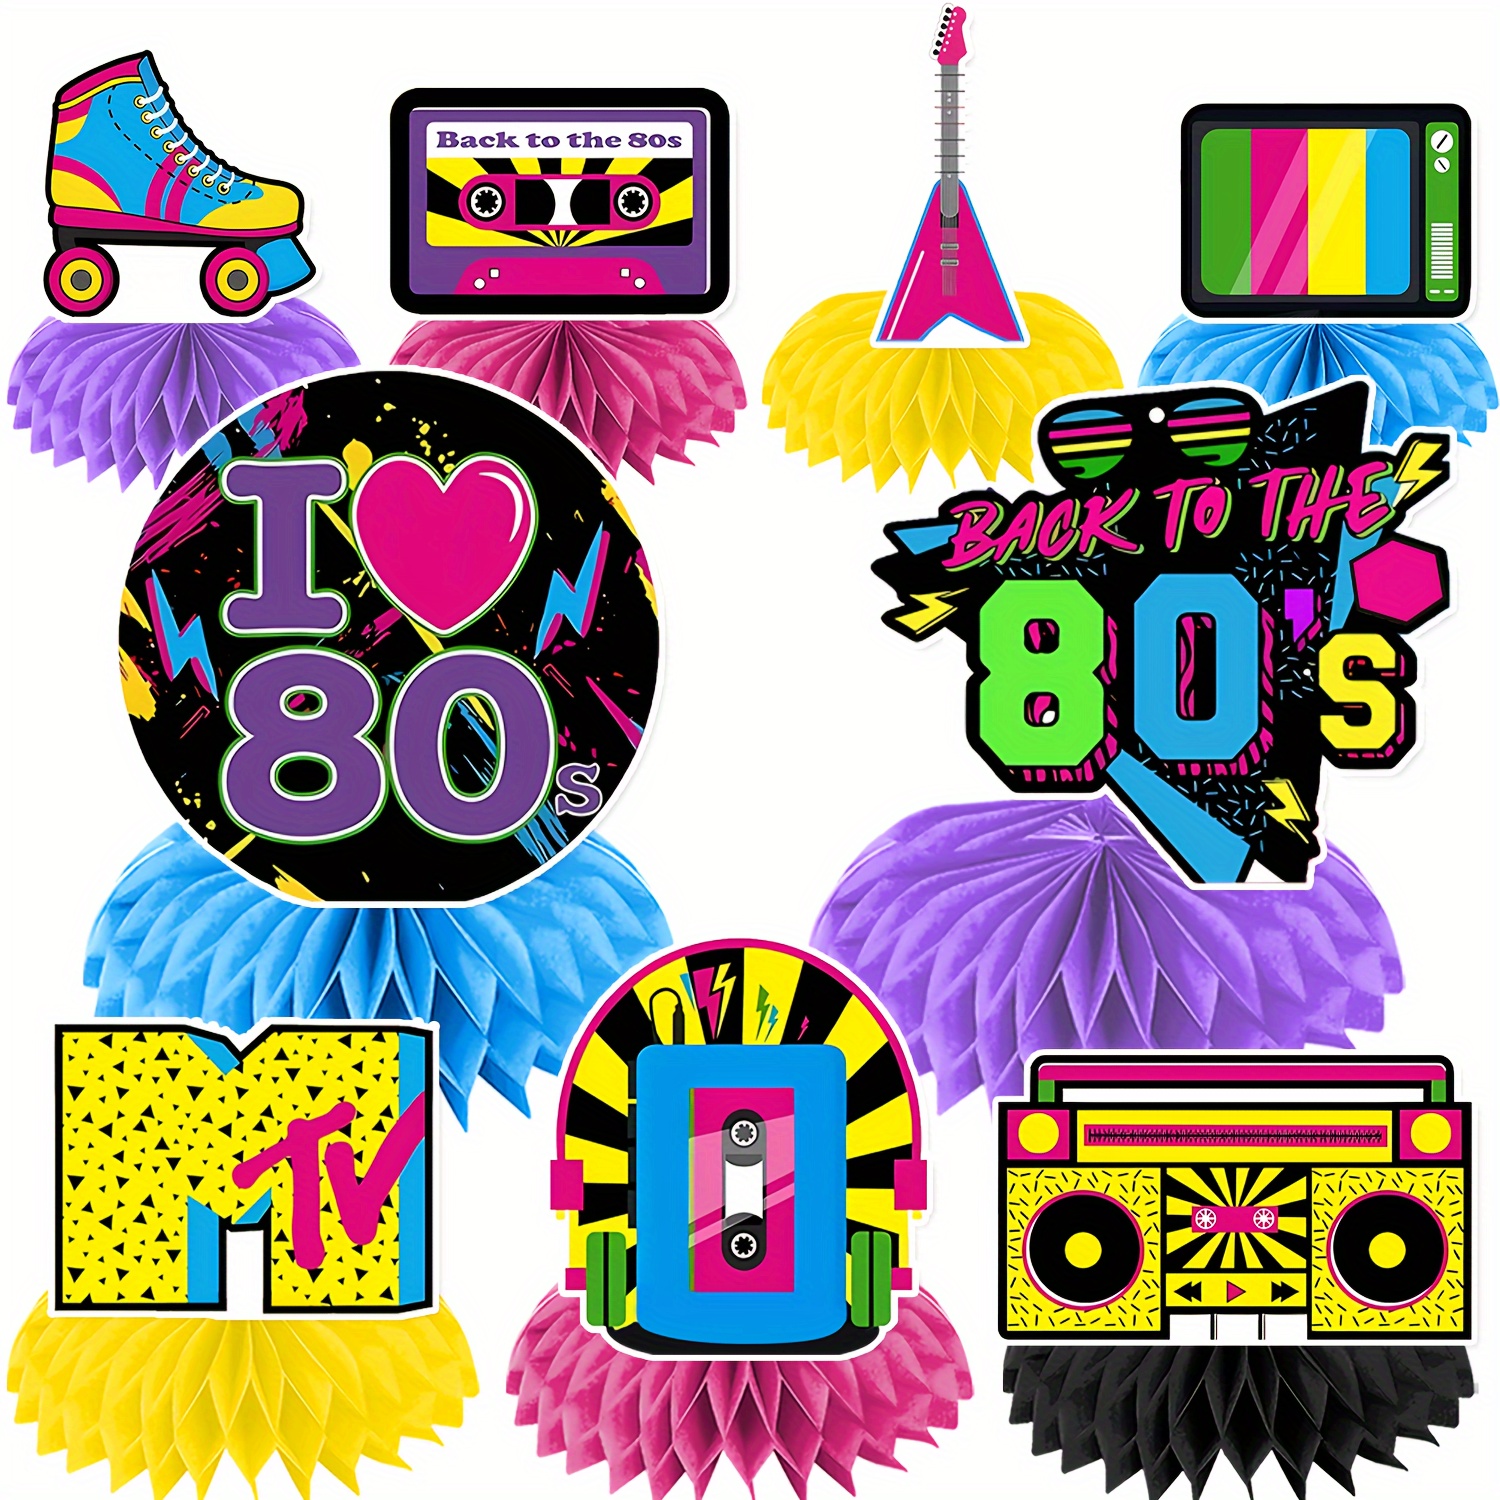 

9pcs 80s Retro Honeycomb Centerpieces - Rock Theme Party Decorations, Paper Tabletop Centerpieces For 1980s Birthday Parties, Neon Light Party Supplies, No Electricity Needed, Universal Holiday Decor